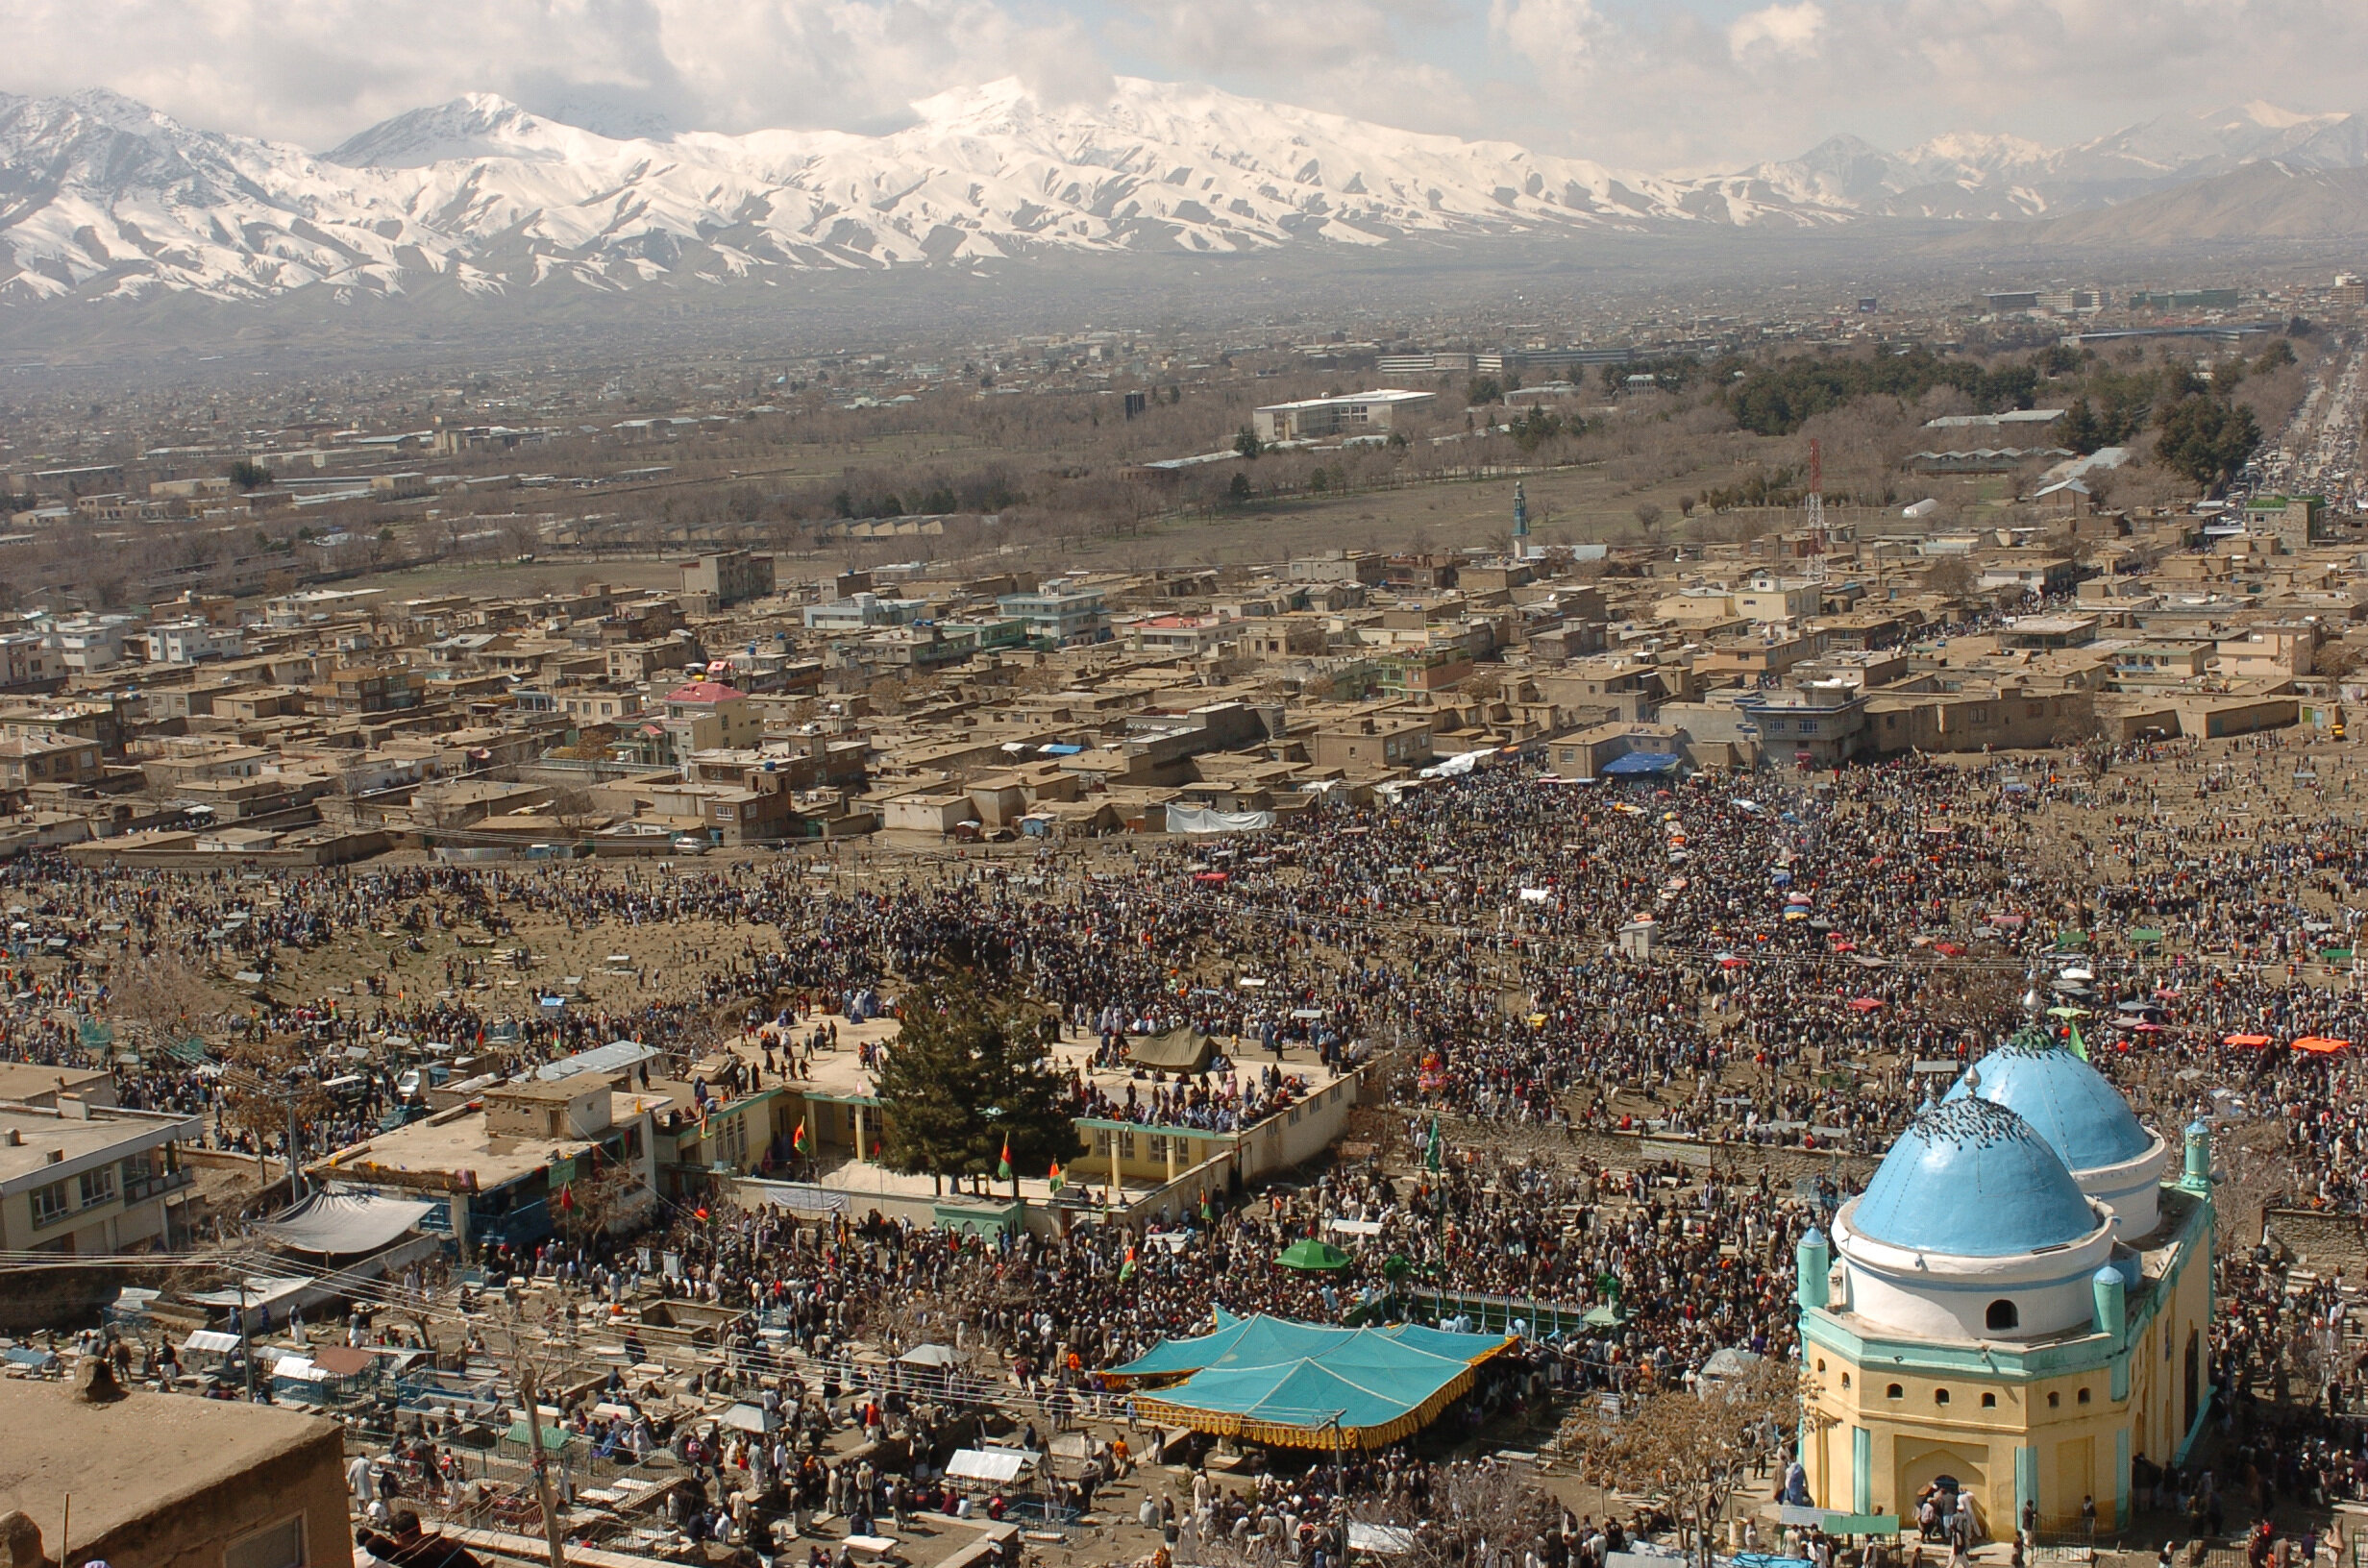  Afghan people gather at a shrine in Kabul, 21 March 2007, as part of hold the celebrations surrounding Naw Rooz, (Afghan and Persian New Year). Naw Rooz is is one of the oldest holidays celebrated in Central Asia, and is marked by feating and the an